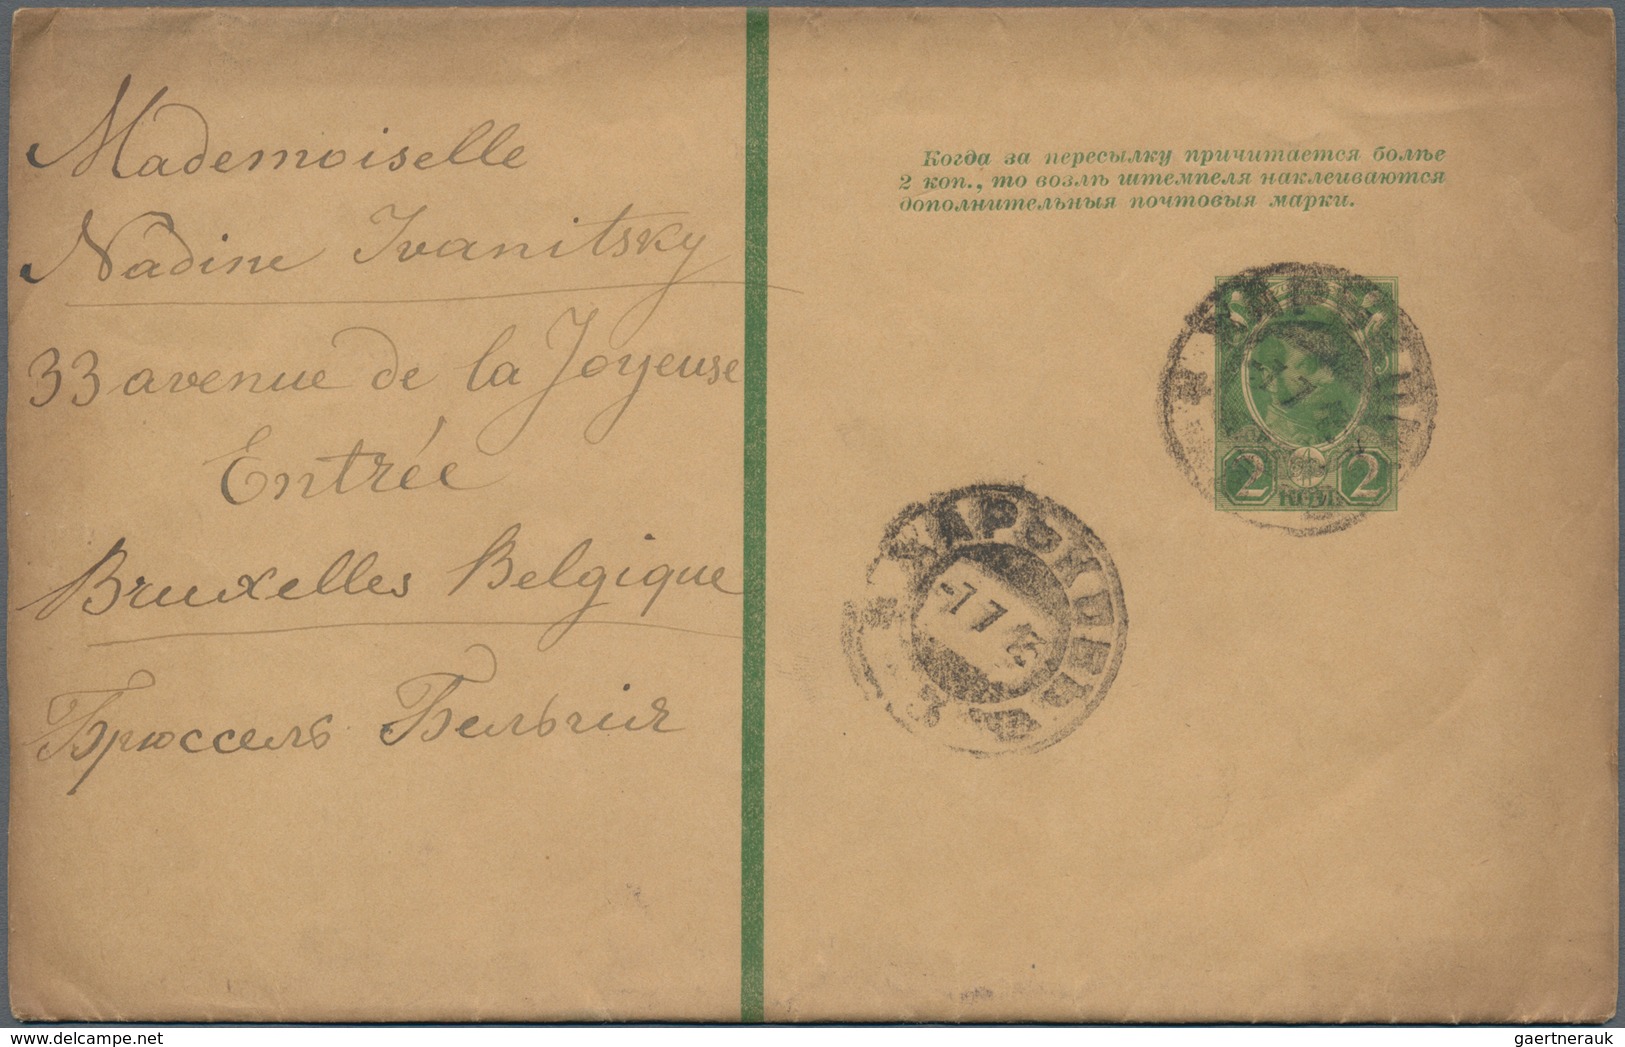 Russland - Ganzsachen: 1877/1917 holding of ca. 140 unused and used postal stationery postcards, env